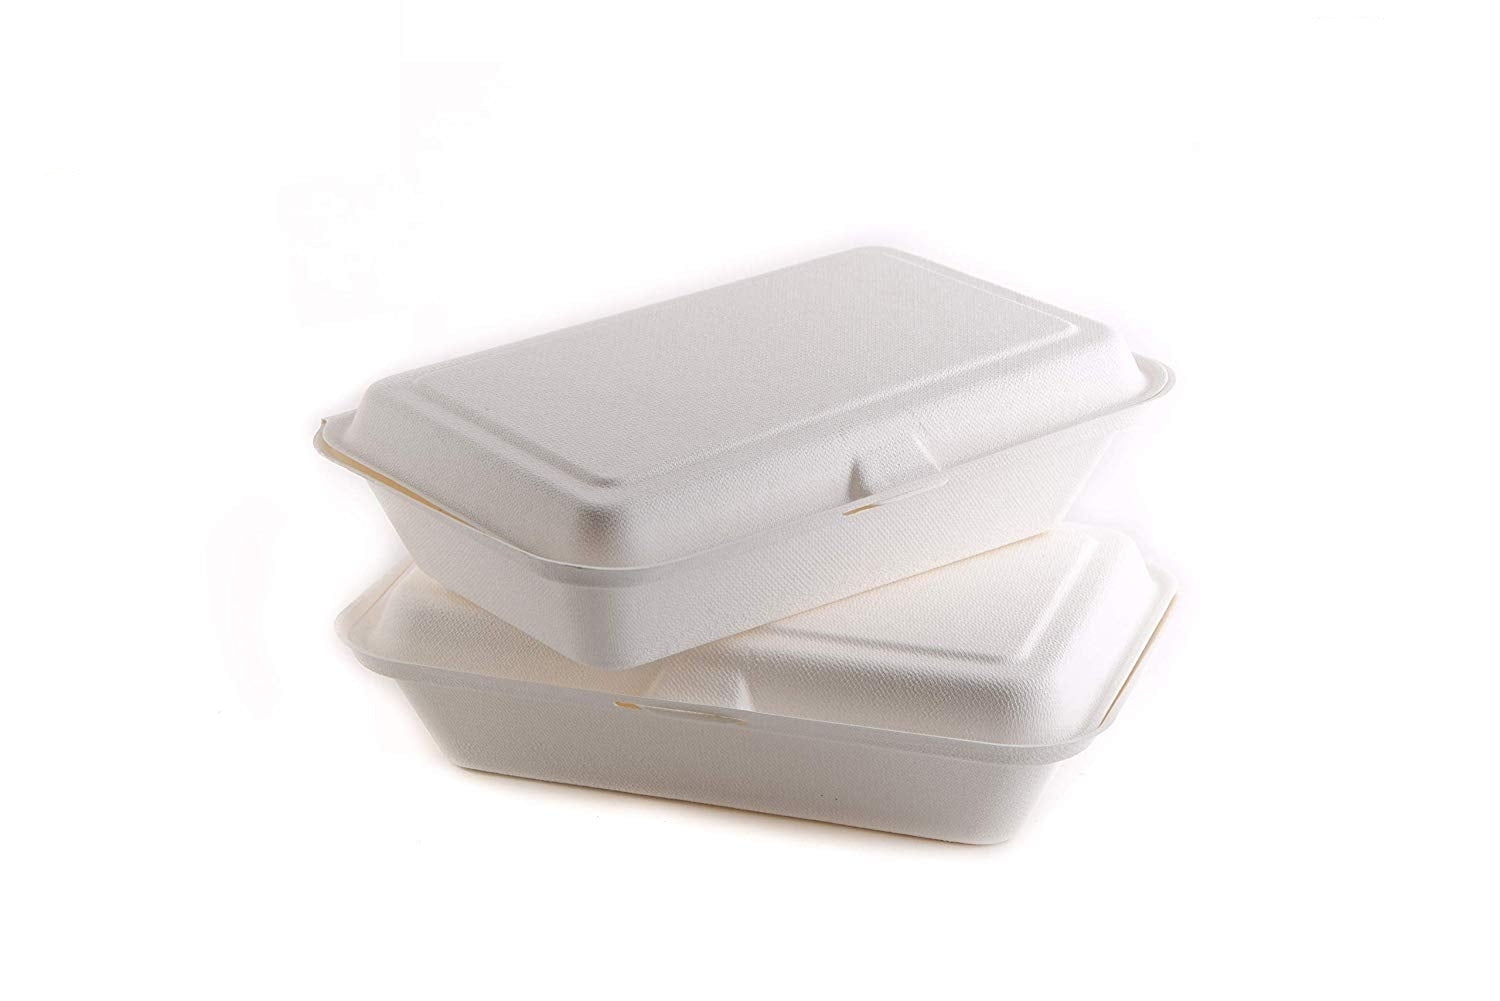 500 Count - Biodegradable 6x6 Take Out Food Containers with Clamshell  Hinged Lid - Eco Friendly Sugarcane Bagasse 100% Compostable, Recyclable,  Togo